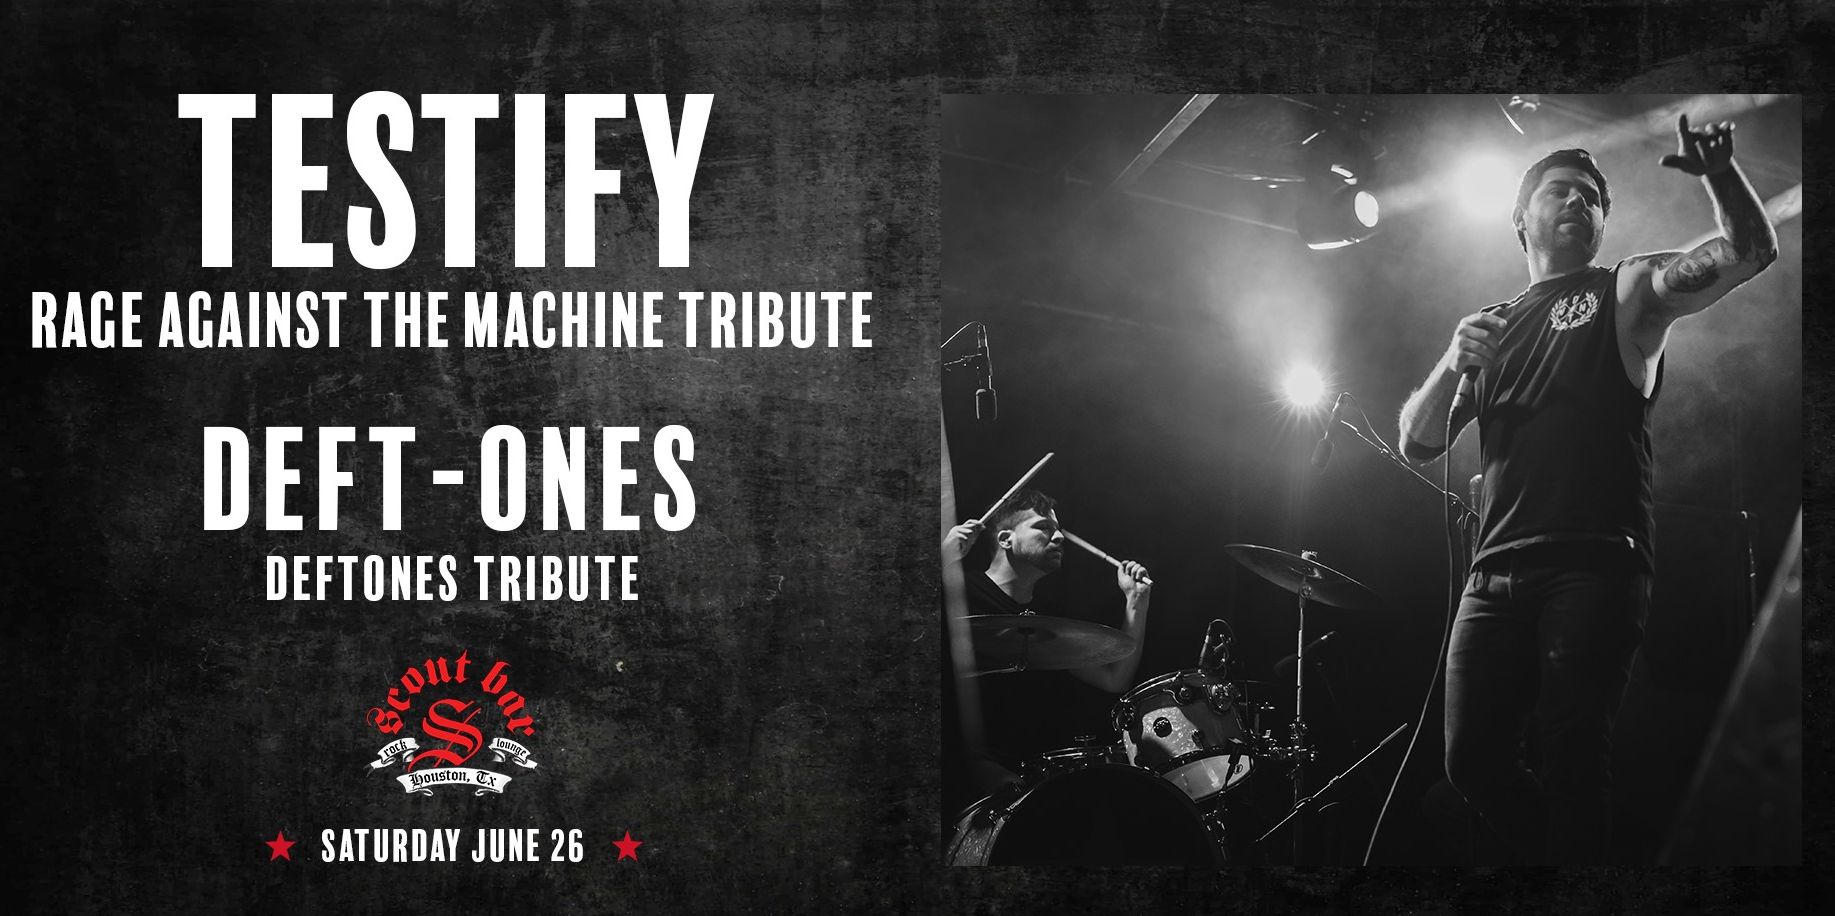 Rage against the Machine and Deftones tributes promotional image